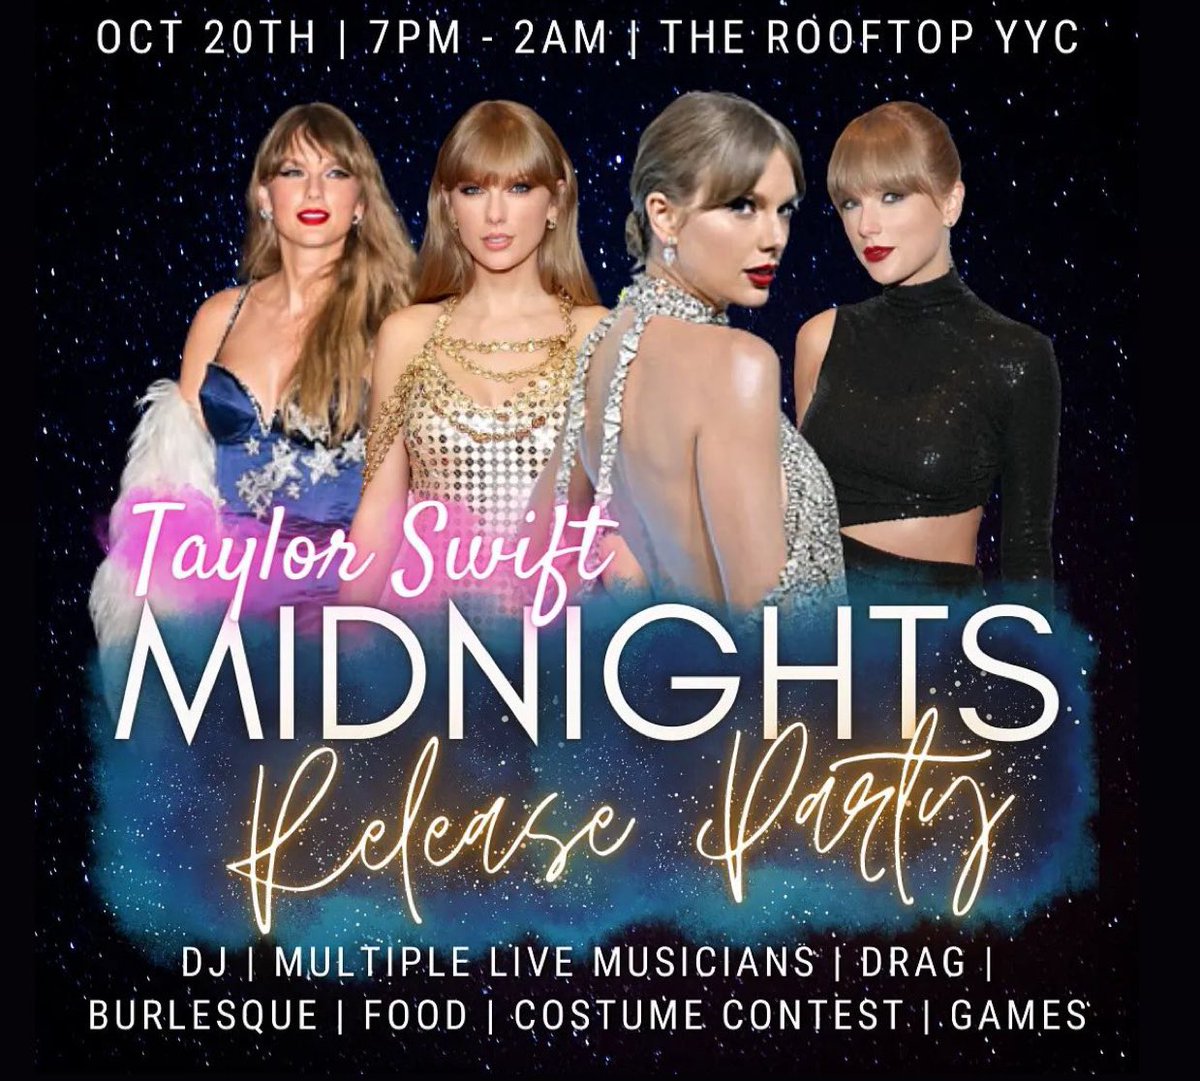 #Meetmeatmidnights!! Come celebrate with us before, during, and after the album drop on October 20th! We are giving you the FULL experience!
MULTIPLE Live music covers, Drag, Burlesque, Games, Costume Contest, Photobooths, Food, DJ and come 10pm #TaylorSwift #midmights #album